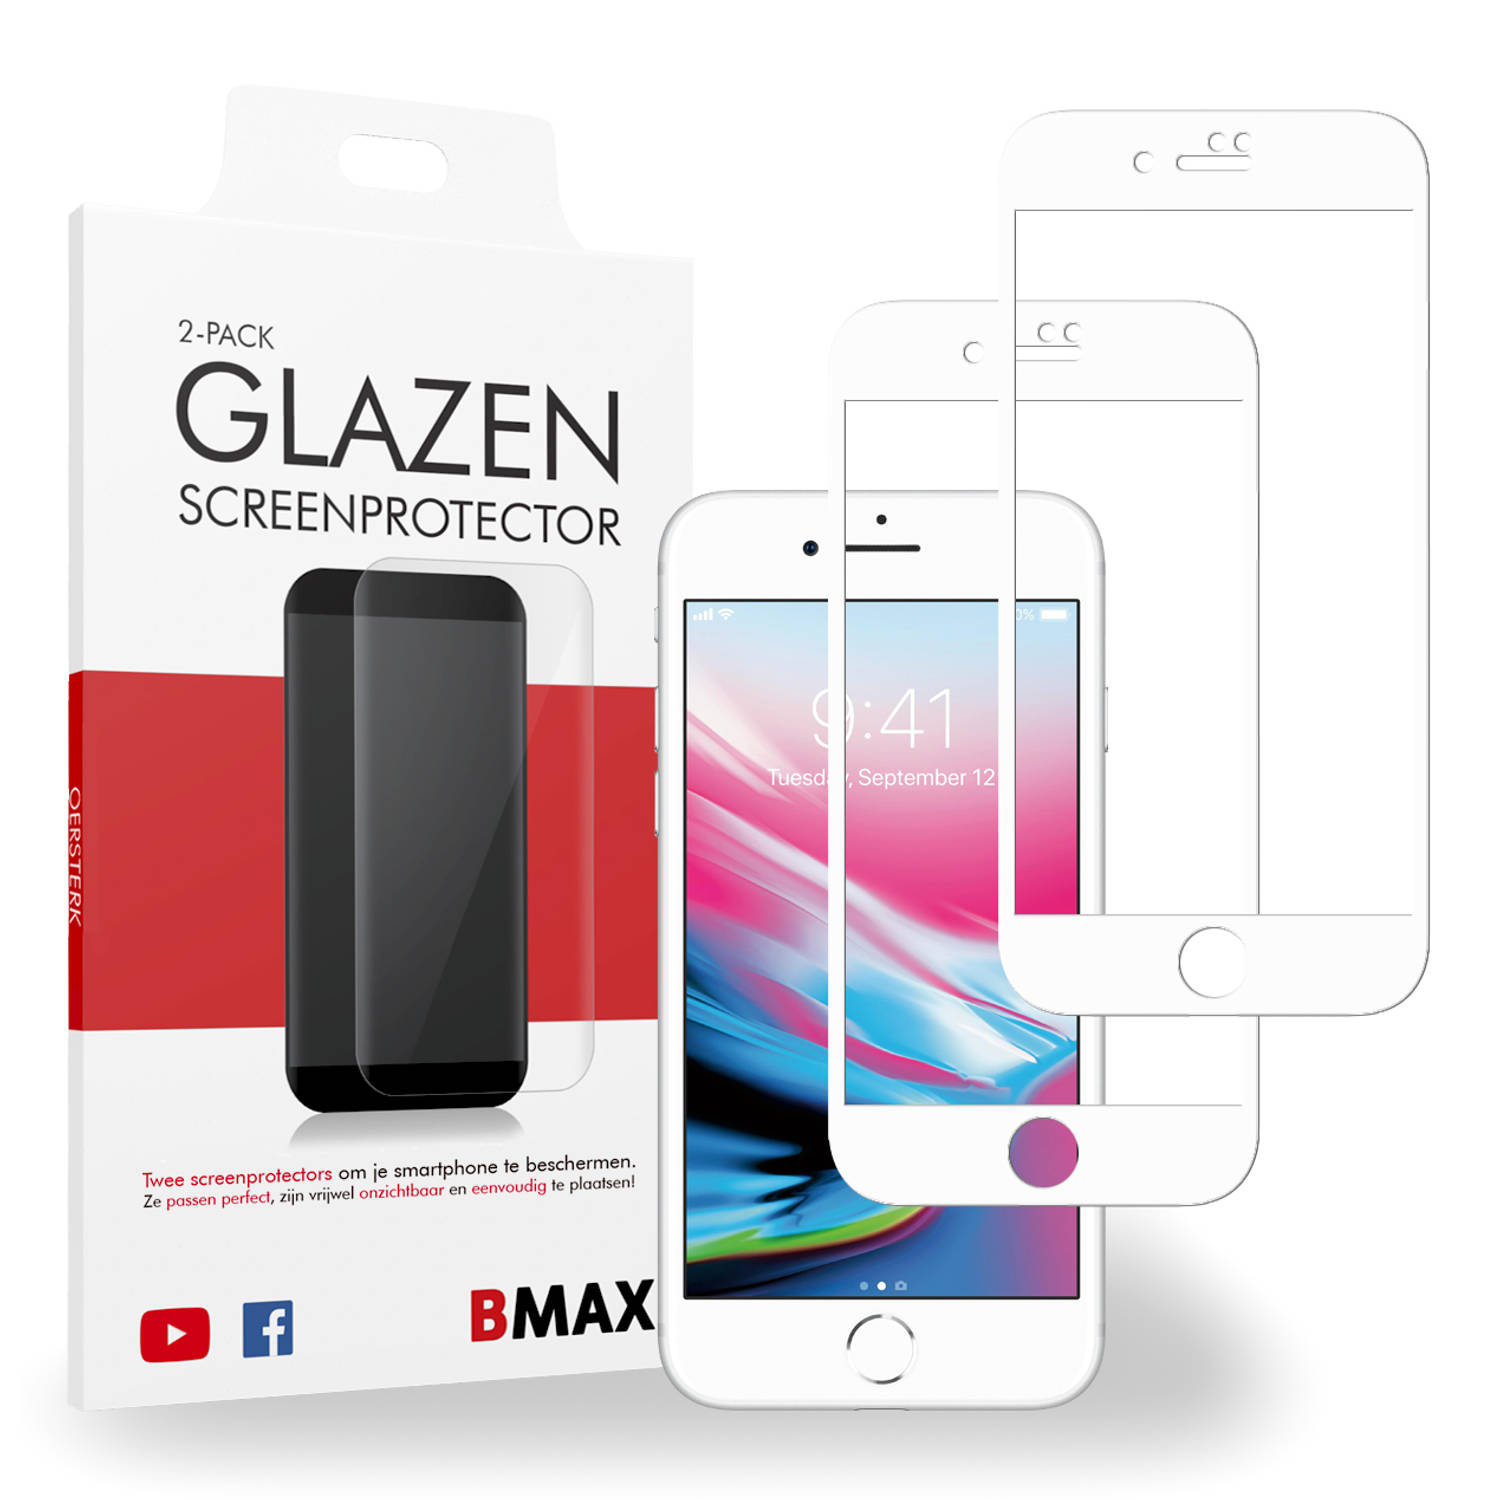 2-pack BMAX Apple iPhone 8 Plus Screenprotector - Glass - Full Cover 5D - White